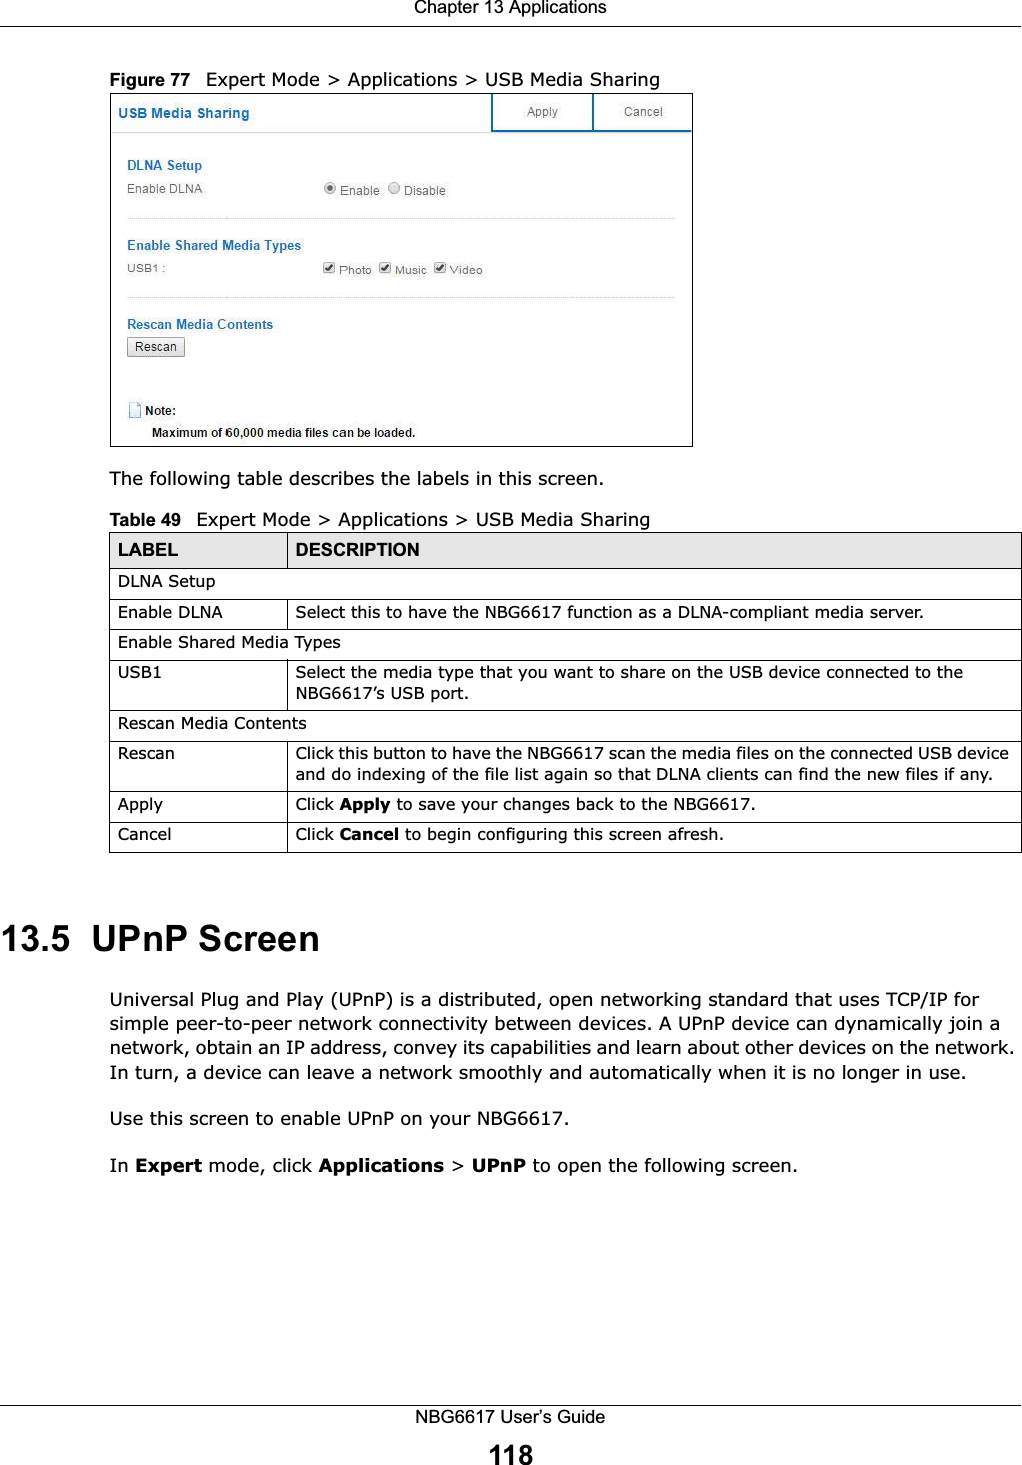 Chapter 13 ApplicationsNBG6617 User’s Guide118Figure 77   Expert Mode &gt; Applications &gt; USB Media Sharing The following table describes the labels in this screen.13.5  UPnP ScreenUniversal Plug and Play (UPnP) is a distributed, open networking standard that uses TCP/IP for simple peer-to-peer network connectivity between devices. A UPnP device can dynamically join a network, obtain an IP address, convey its capabilities and learn about other devices on the network. In turn, a device can leave a network smoothly and automatically when it is no longer in use.Use this screen to enable UPnP on your NBG6617.In Expert mode, click Applications &gt; UPnP to open the following screen. Table 49   Expert Mode &gt; Applications &gt; USB Media SharingLABEL DESCRIPTIONDLNA SetupEnable DLNA Select this to have the NBG6617 function as a DLNA-compliant media server.Enable Shared Media TypesUSB1 Select the media type that you want to share on the USB device connected to the NBG6617’s USB port.Rescan Media ContentsRescan  Click this button to have the NBG6617 scan the media files on the connected USB device and do indexing of the file list again so that DLNA clients can find the new files if any.Apply Click Apply to save your changes back to the NBG6617.Cancel Click Cancel to begin configuring this screen afresh.